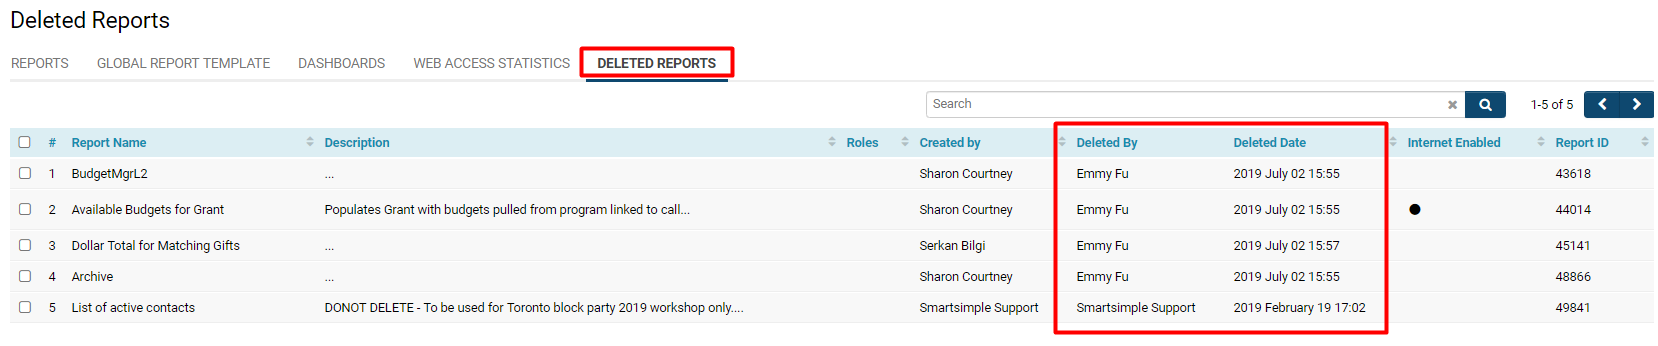 Deleted reports section.png